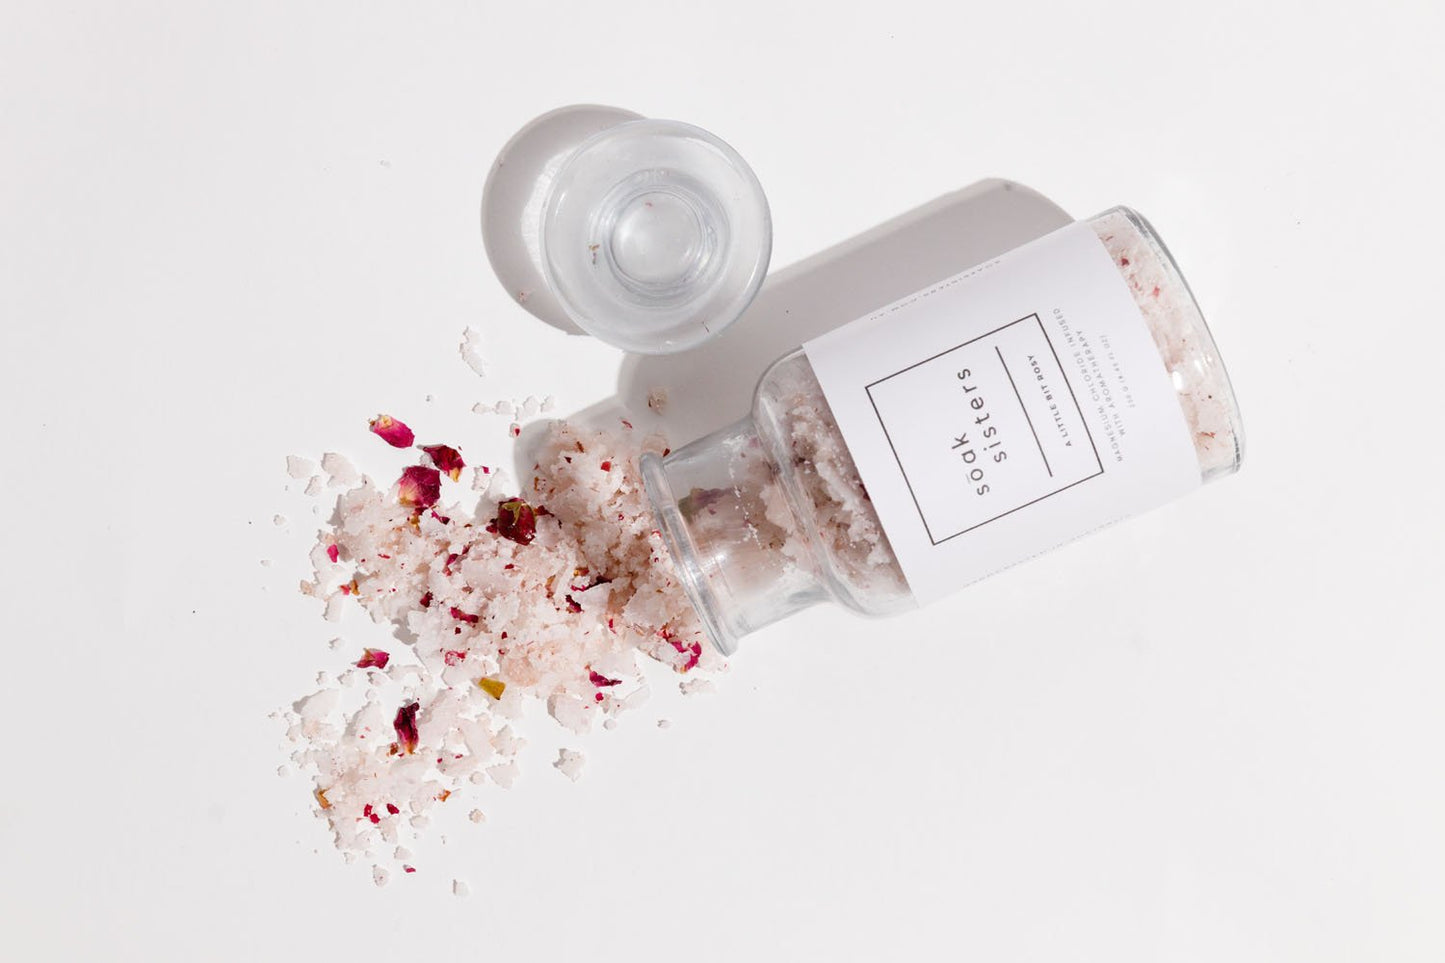 Jar of A Little Bit Rosy on white surface with bath salts spilling out